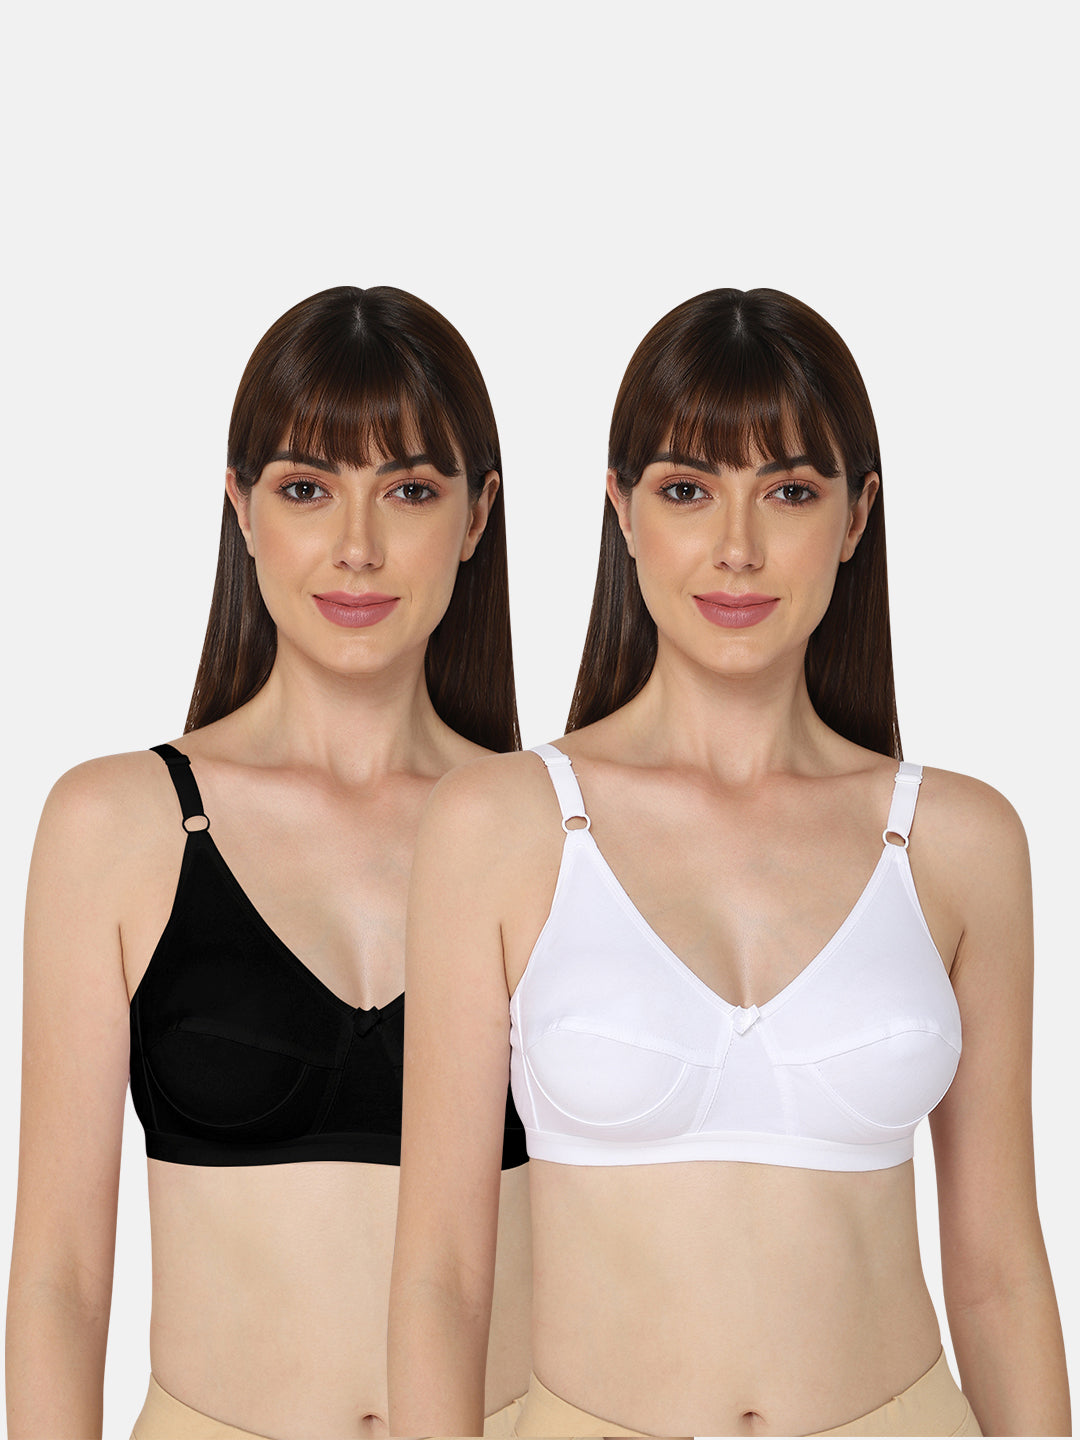 BraWorld - The lacy bra that you wear every single day